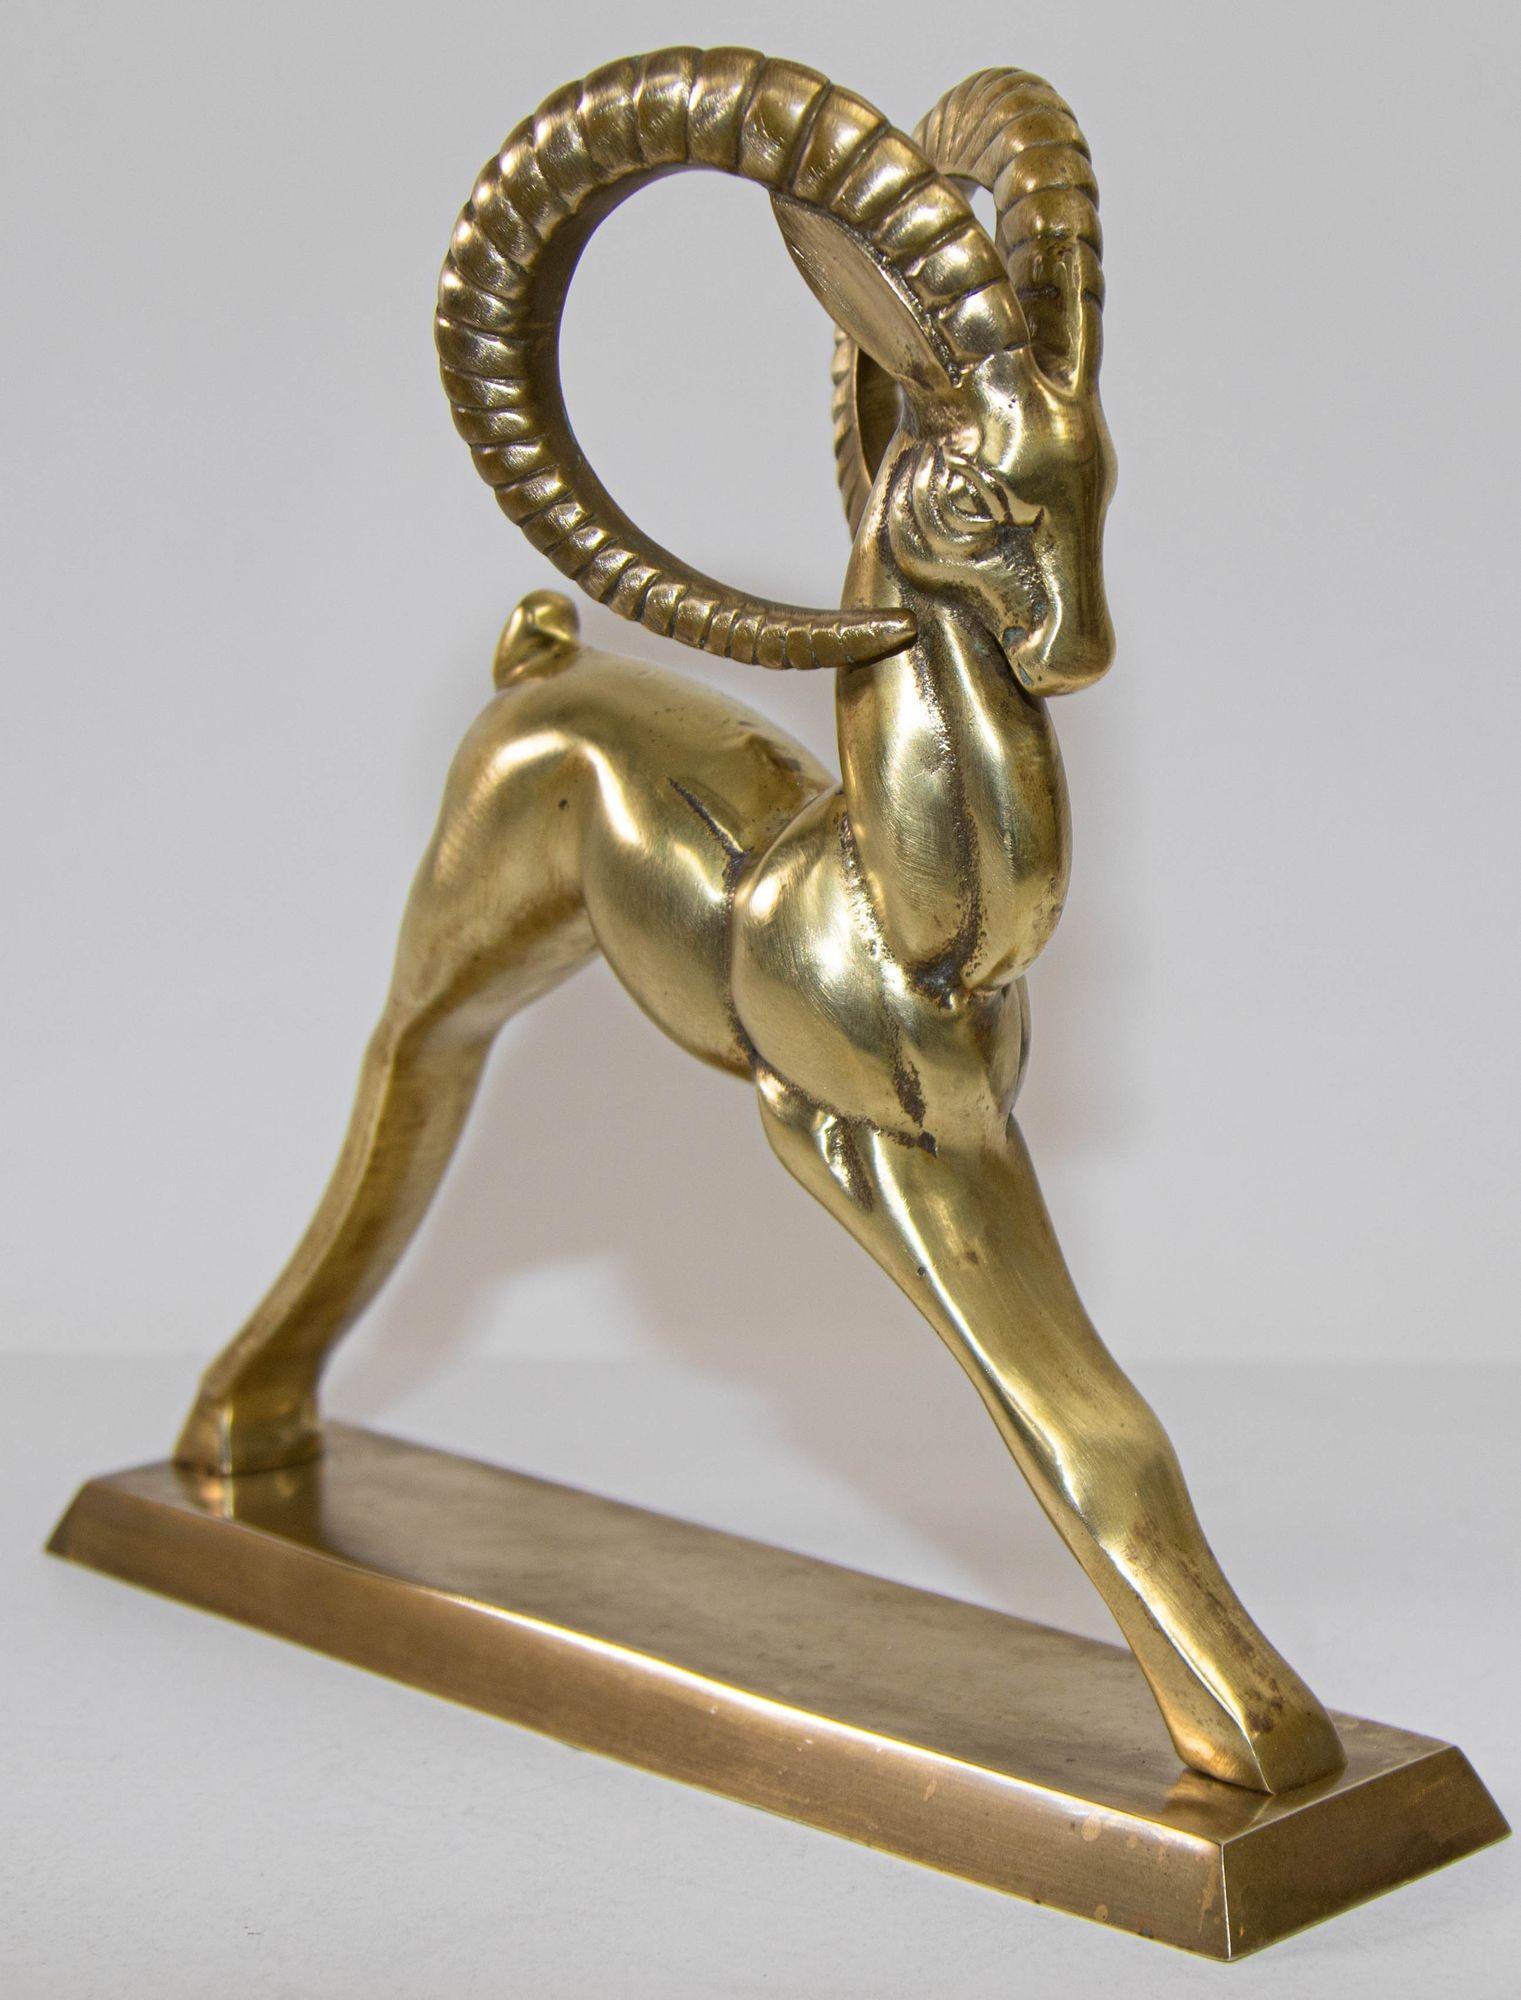 20th Century Vintage French Art Deco Style Sculpture of Brass Ibex Antelope